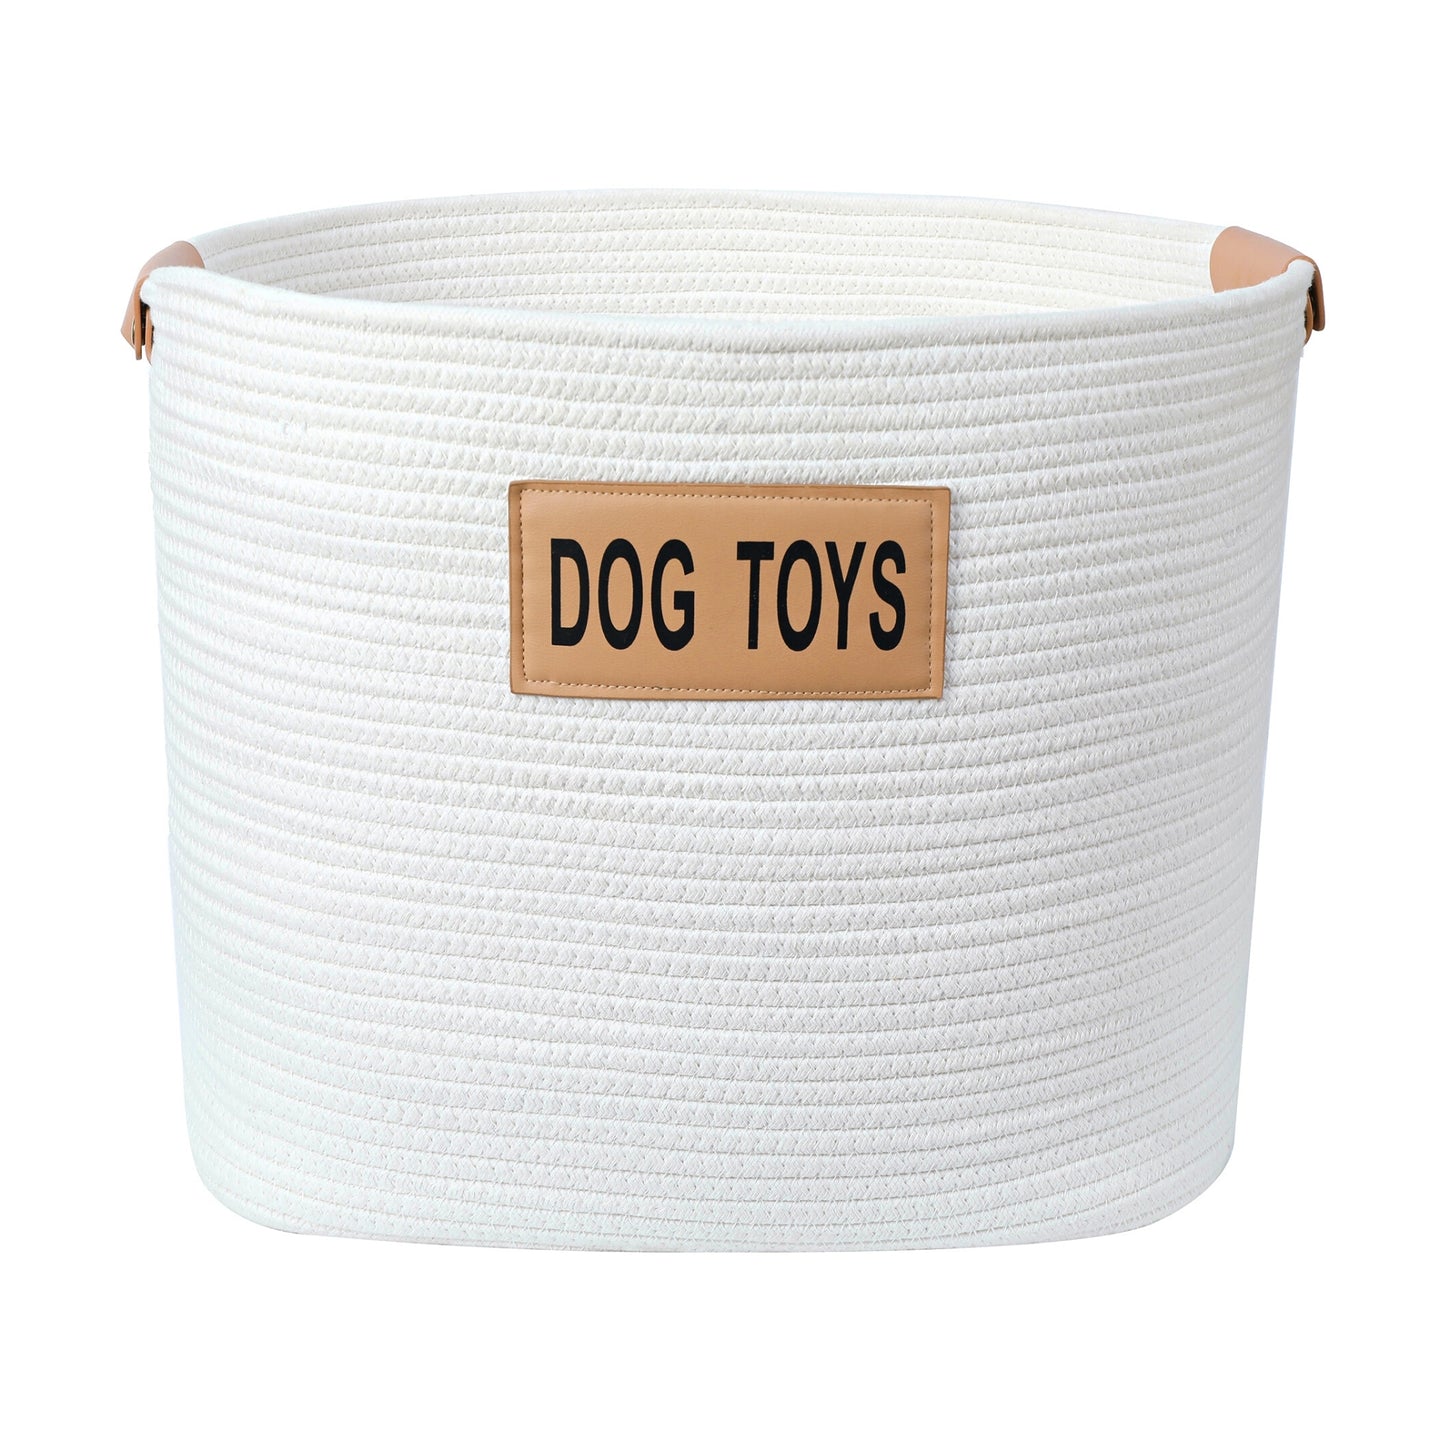 Midlee Rope Dog Toys Basket with Leather Handles